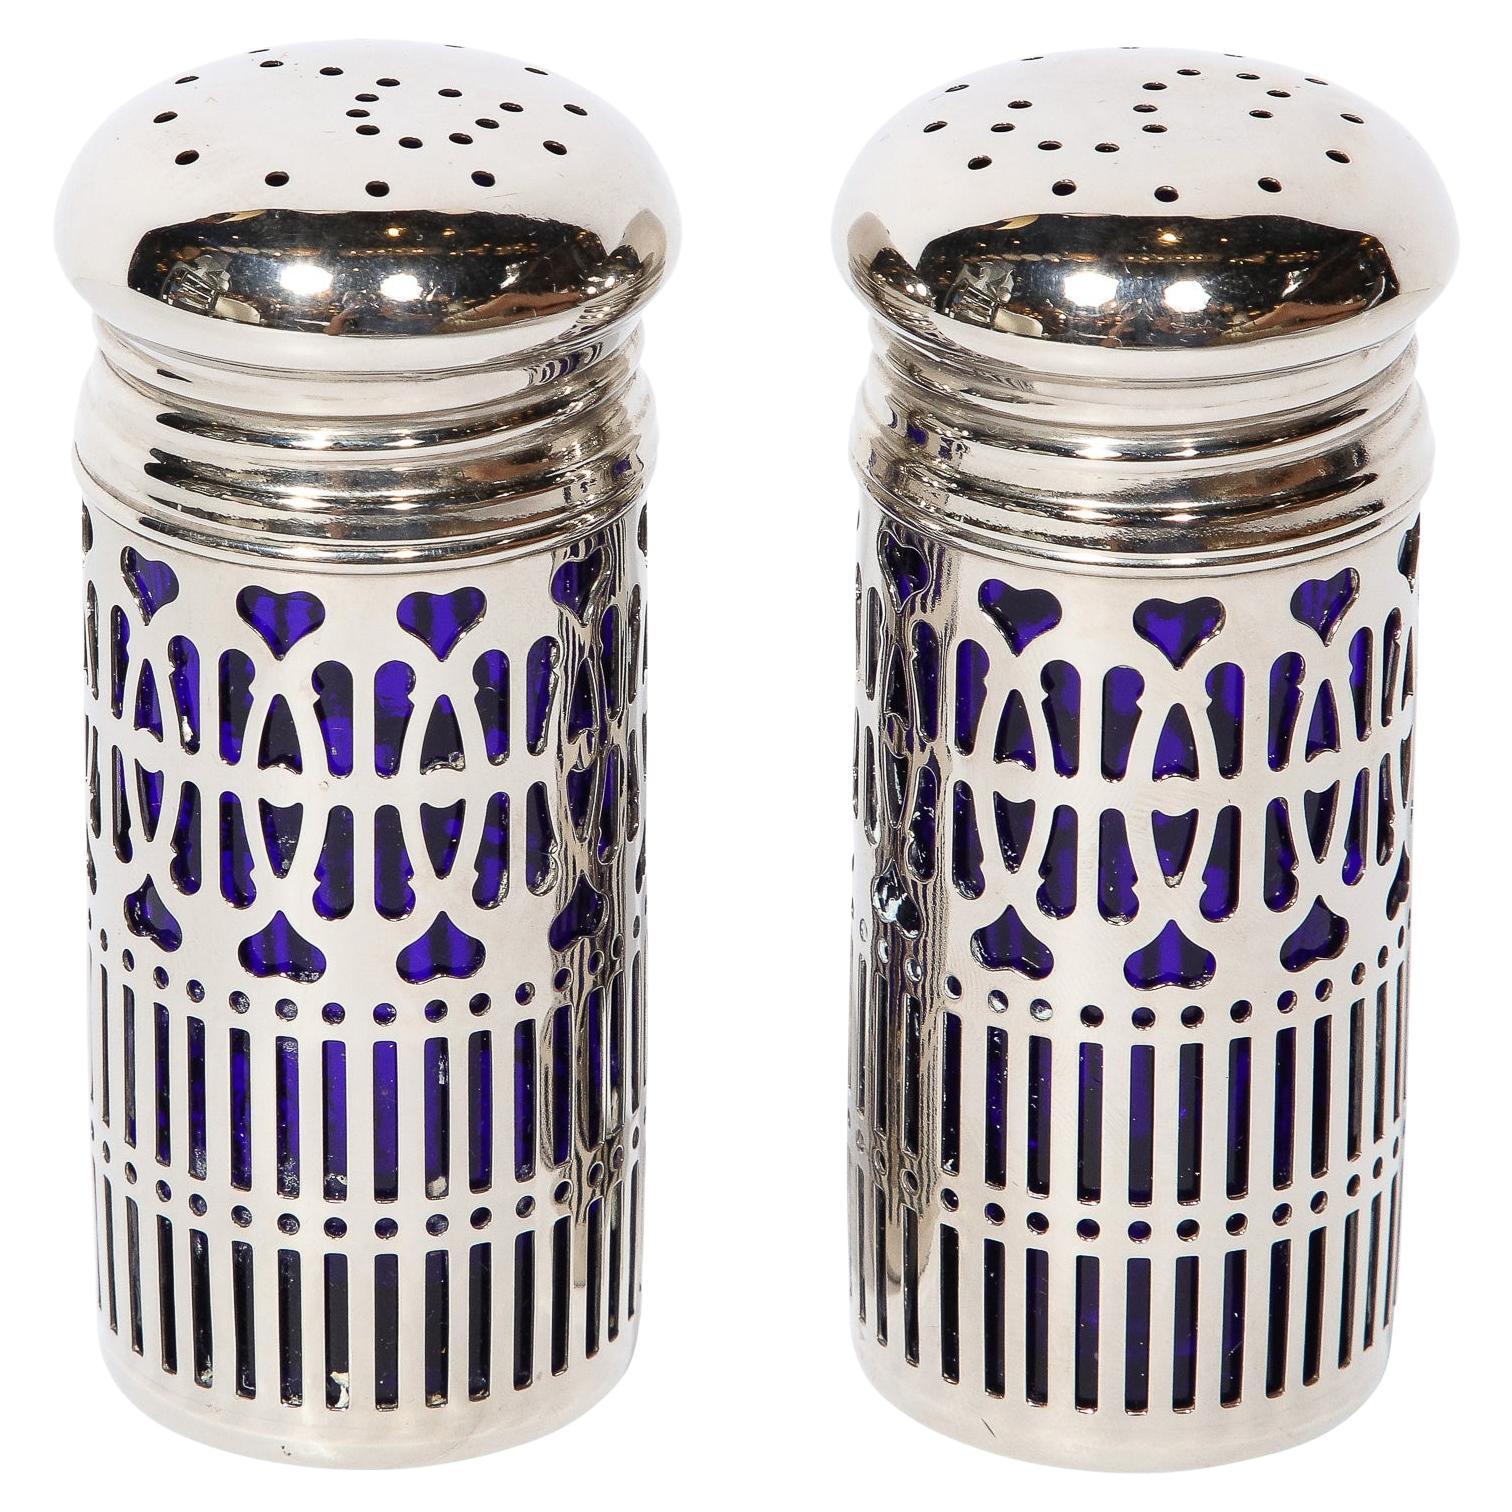 https://a.1stdibscdn.com/pair-of-art-deco-silver-plate-and-cobalt-blue-glass-salt-and-pepper-shakers-for-sale/f_7934/f_362690521695325156694/f_36269052_1695325157408_bg_processed.jpg